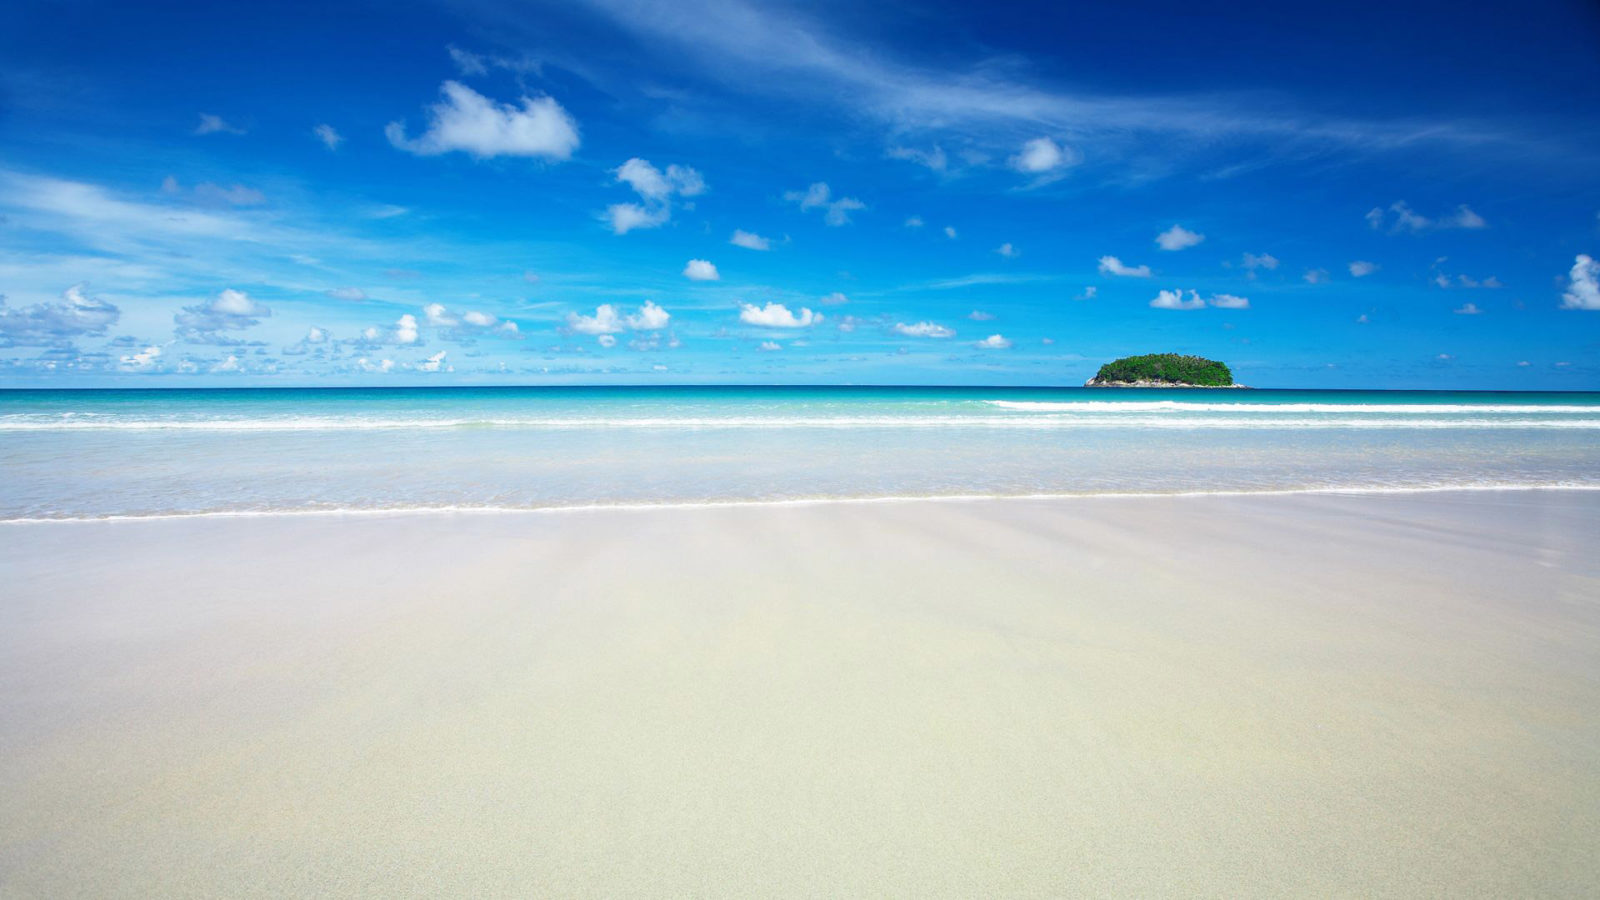 129 Beach Wallpaper Examples To Put On Your Desktop Background